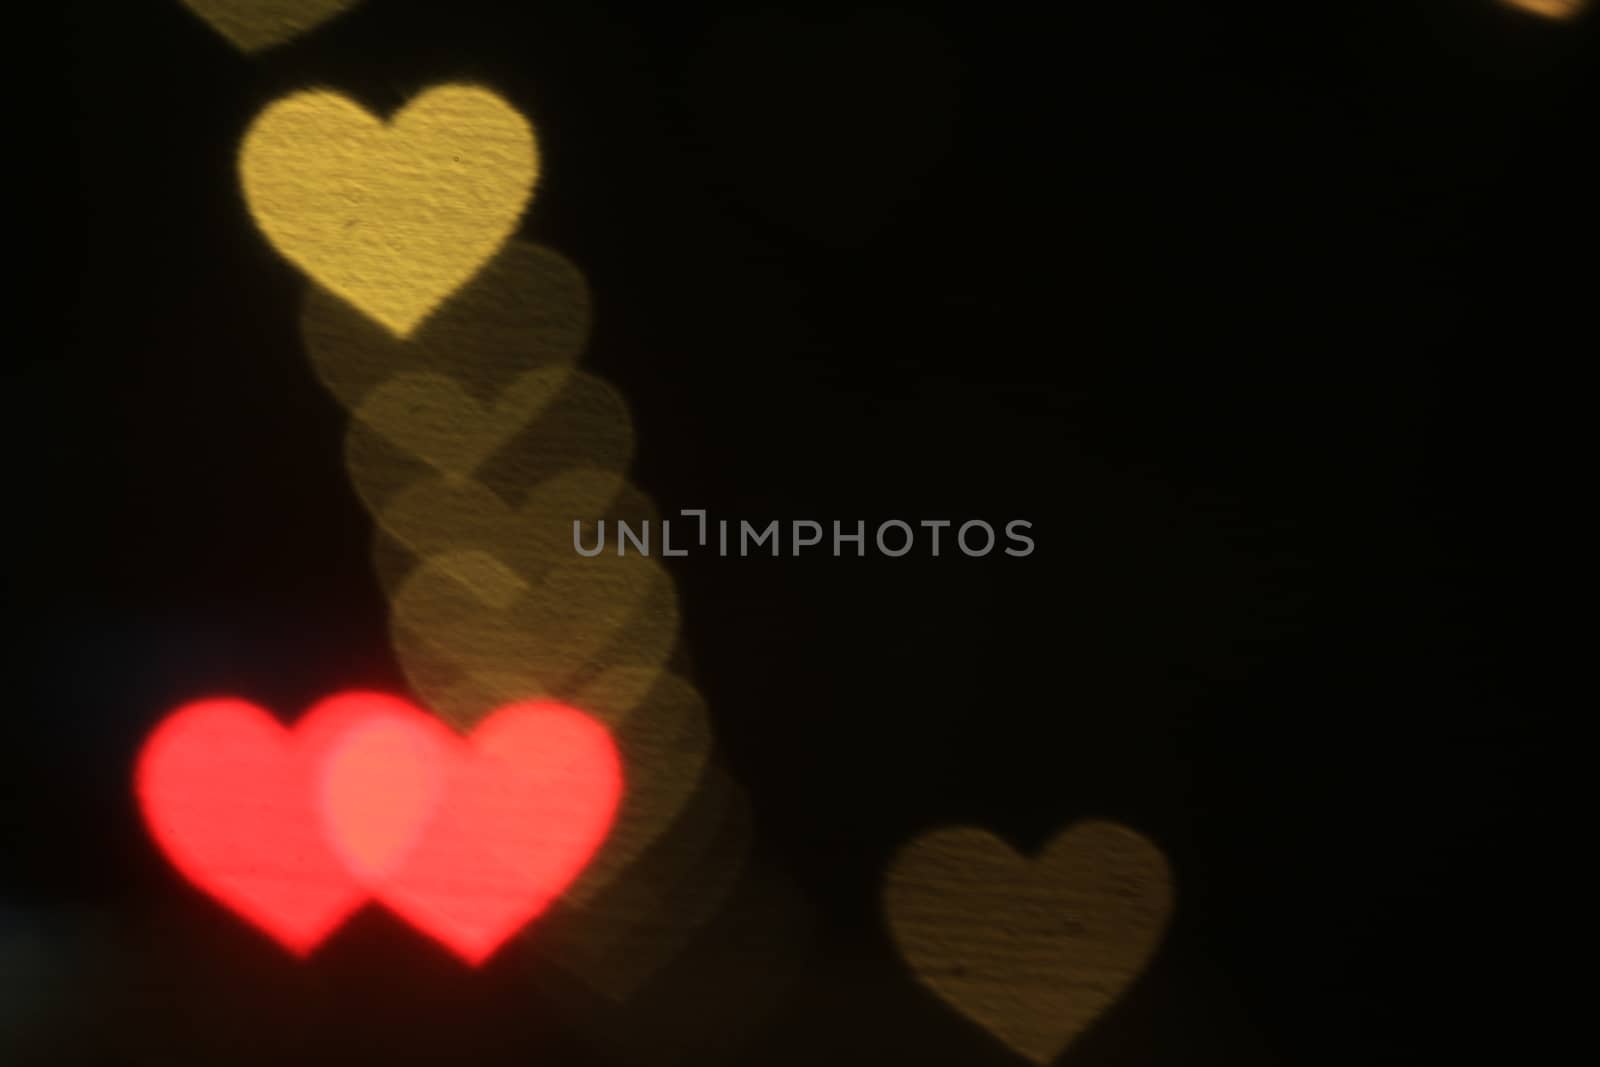 Valentines Colorful heart-shaped on black background lighting bokeh for decoration at night backdrop wallpaper blurred valentine, Love Pictures background, Lighting heart shaped soft at night abstract by cgdeaw